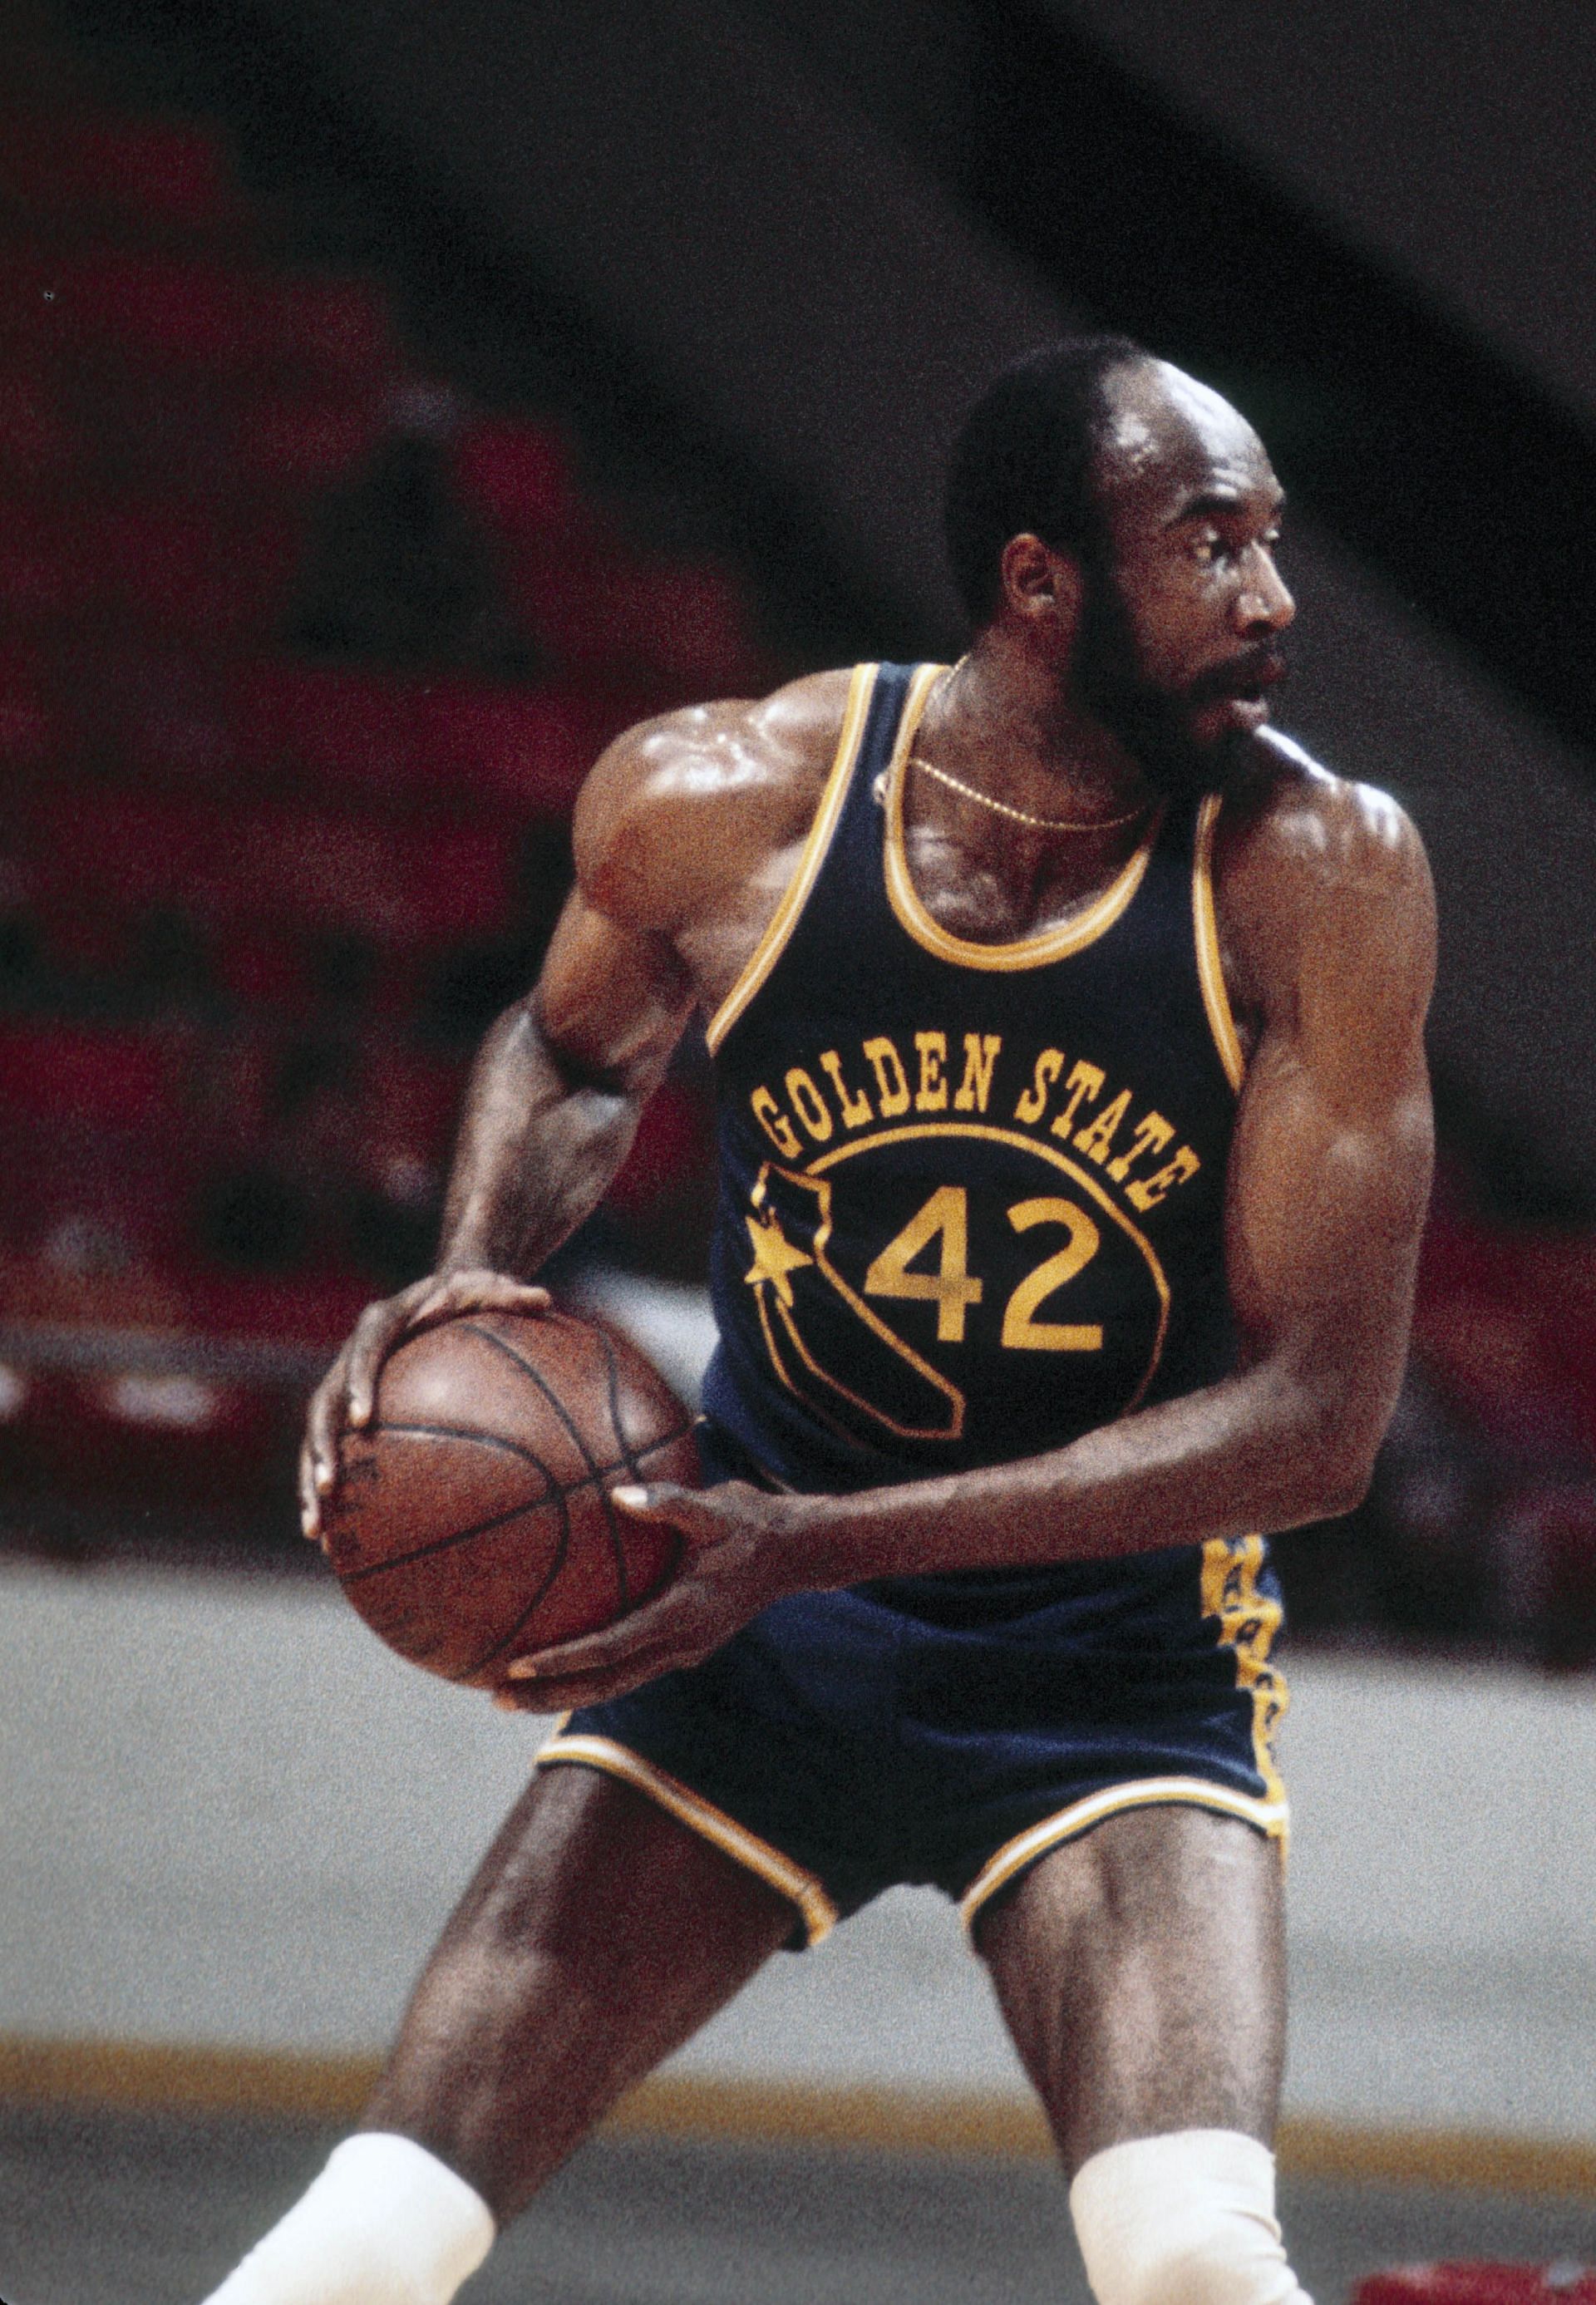 Hall of Famer Nate Thurmond was a monster on the boards.